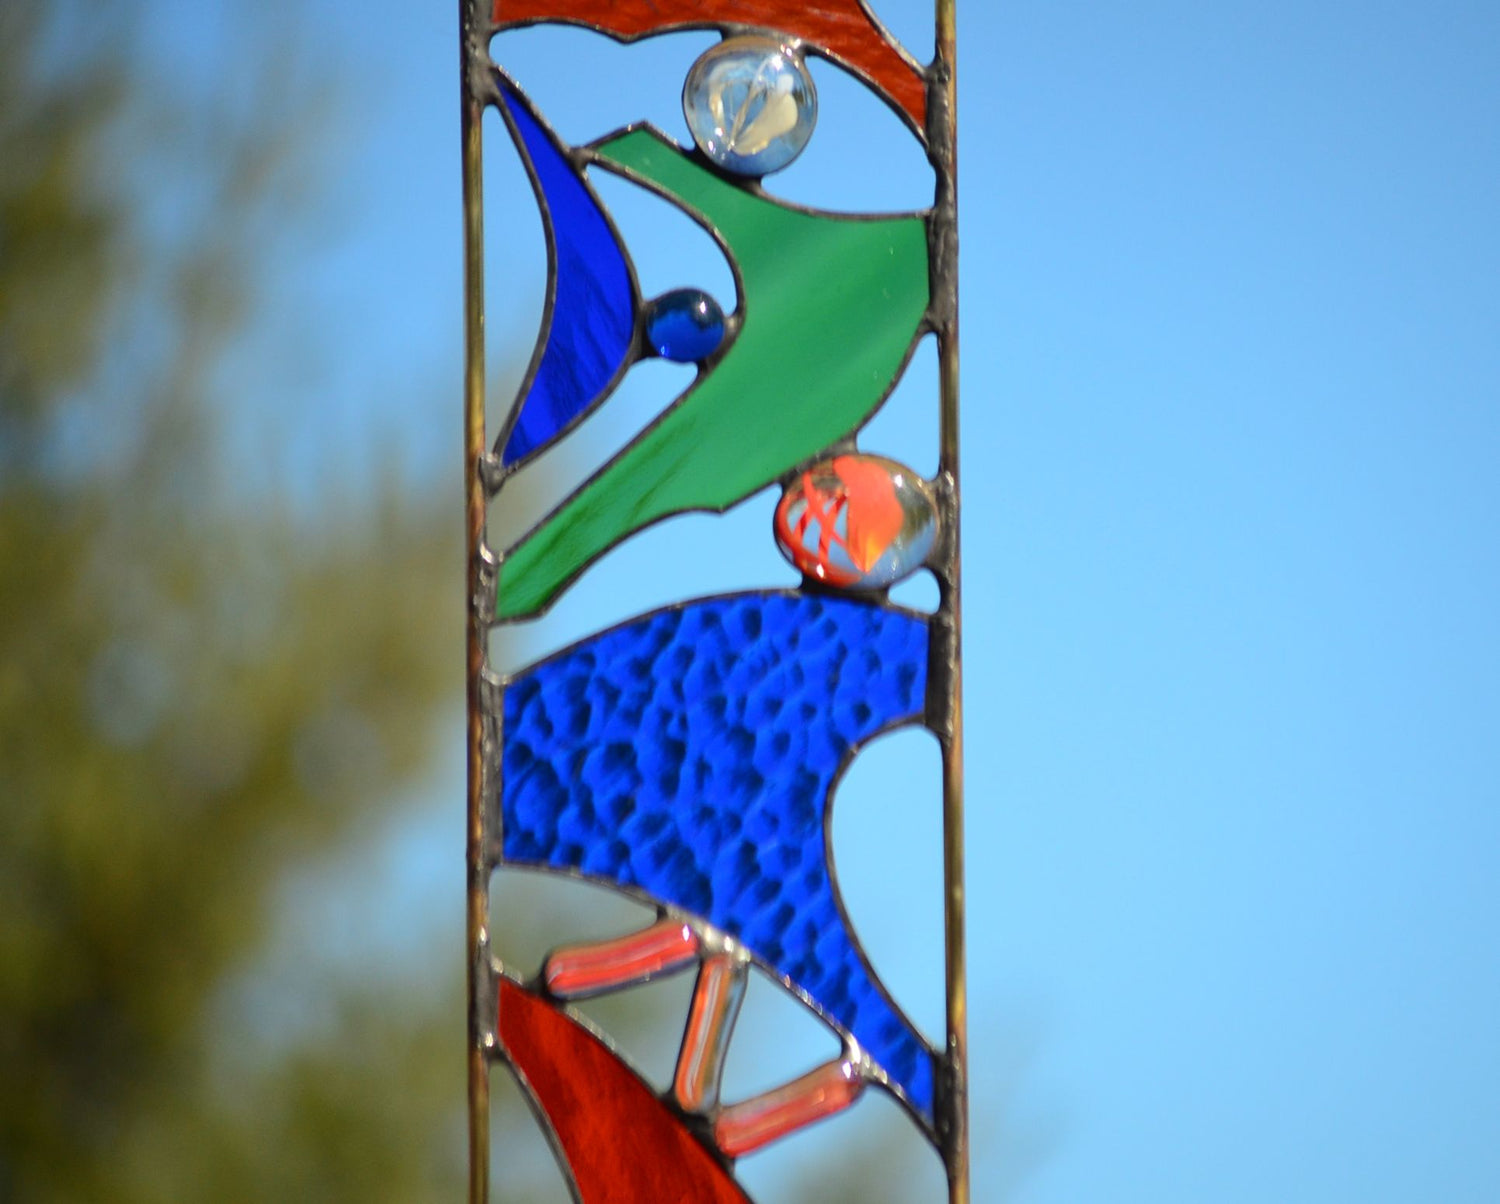 Glass Lawn Art Stained Glass Garden Decoration. &quot;Yippee!&quot;